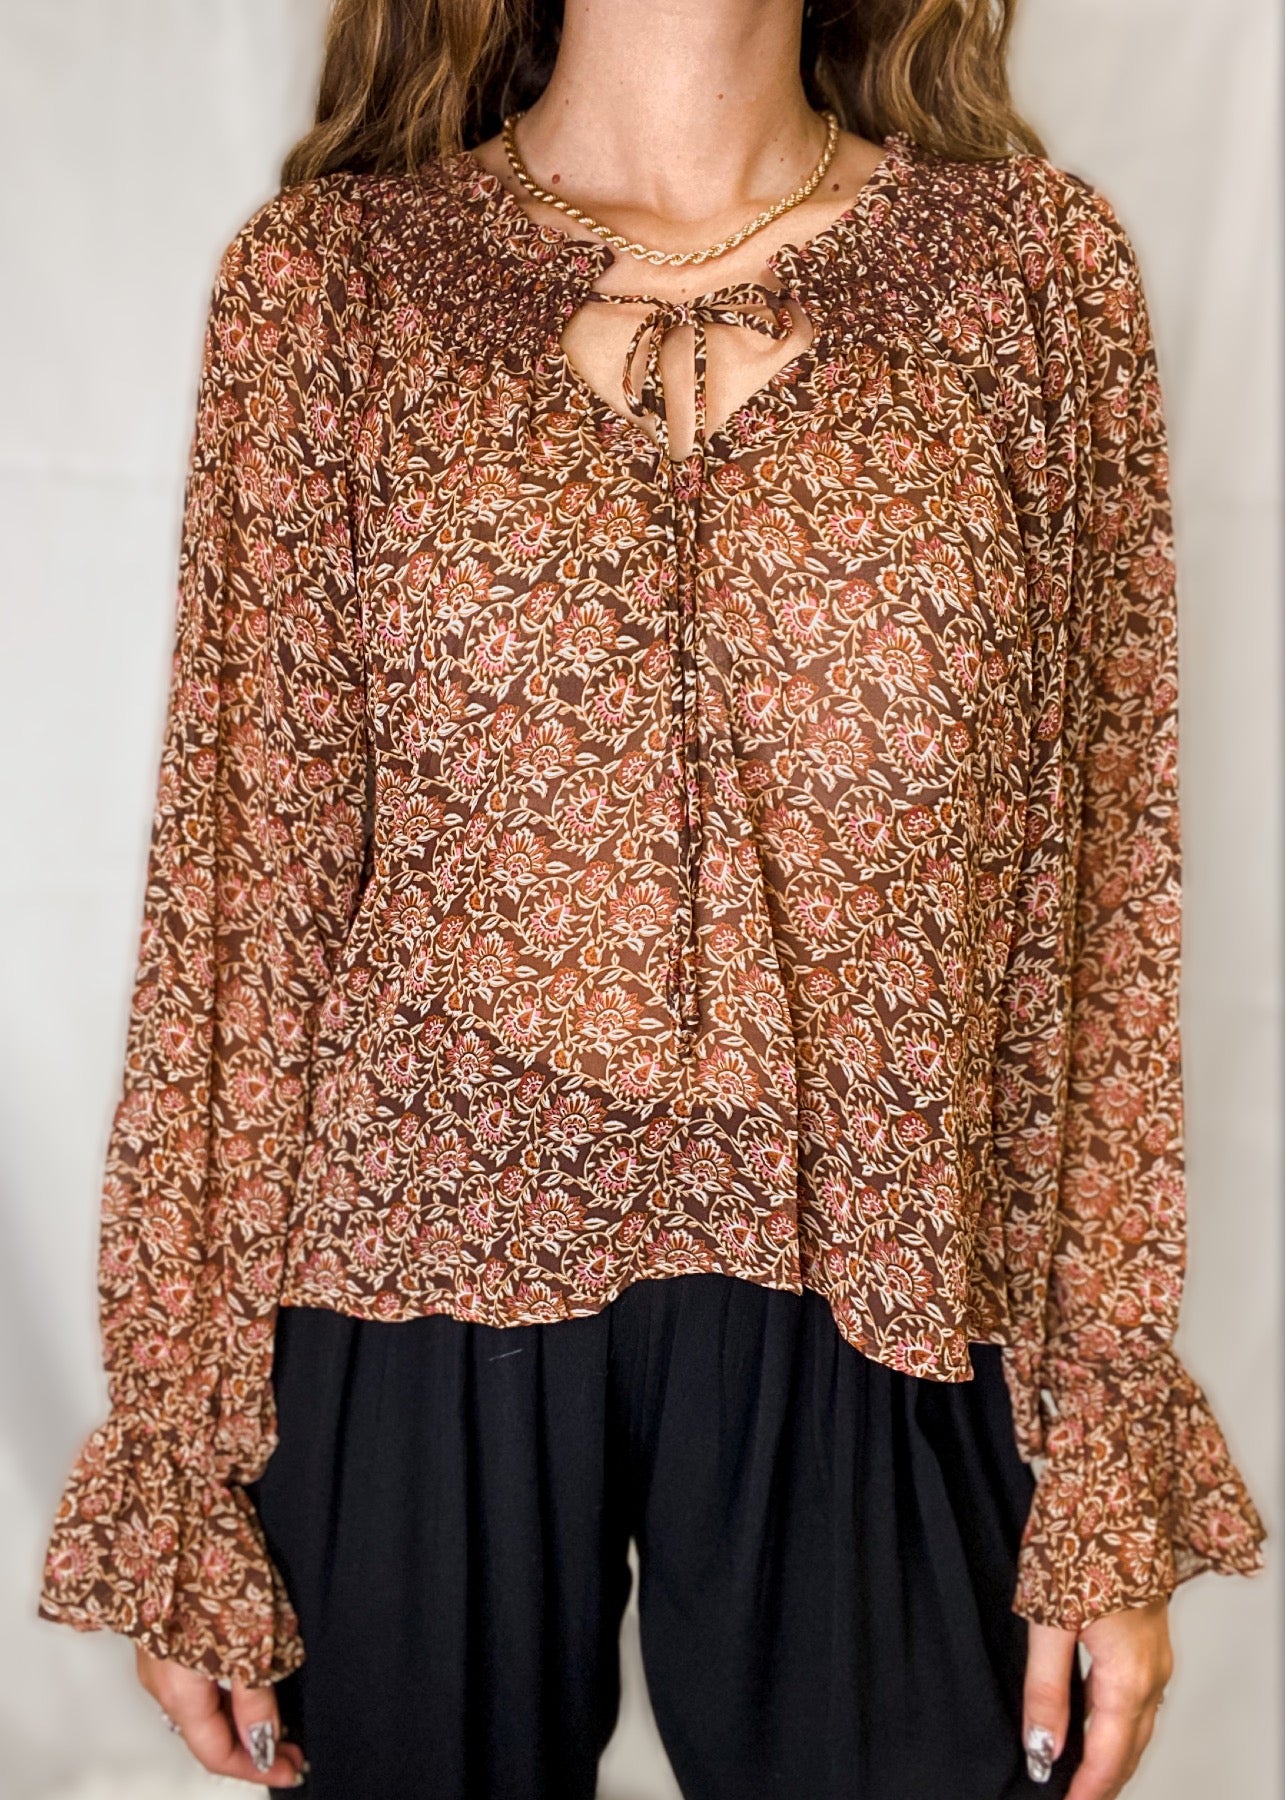 Everly Tapestry Peasant Top